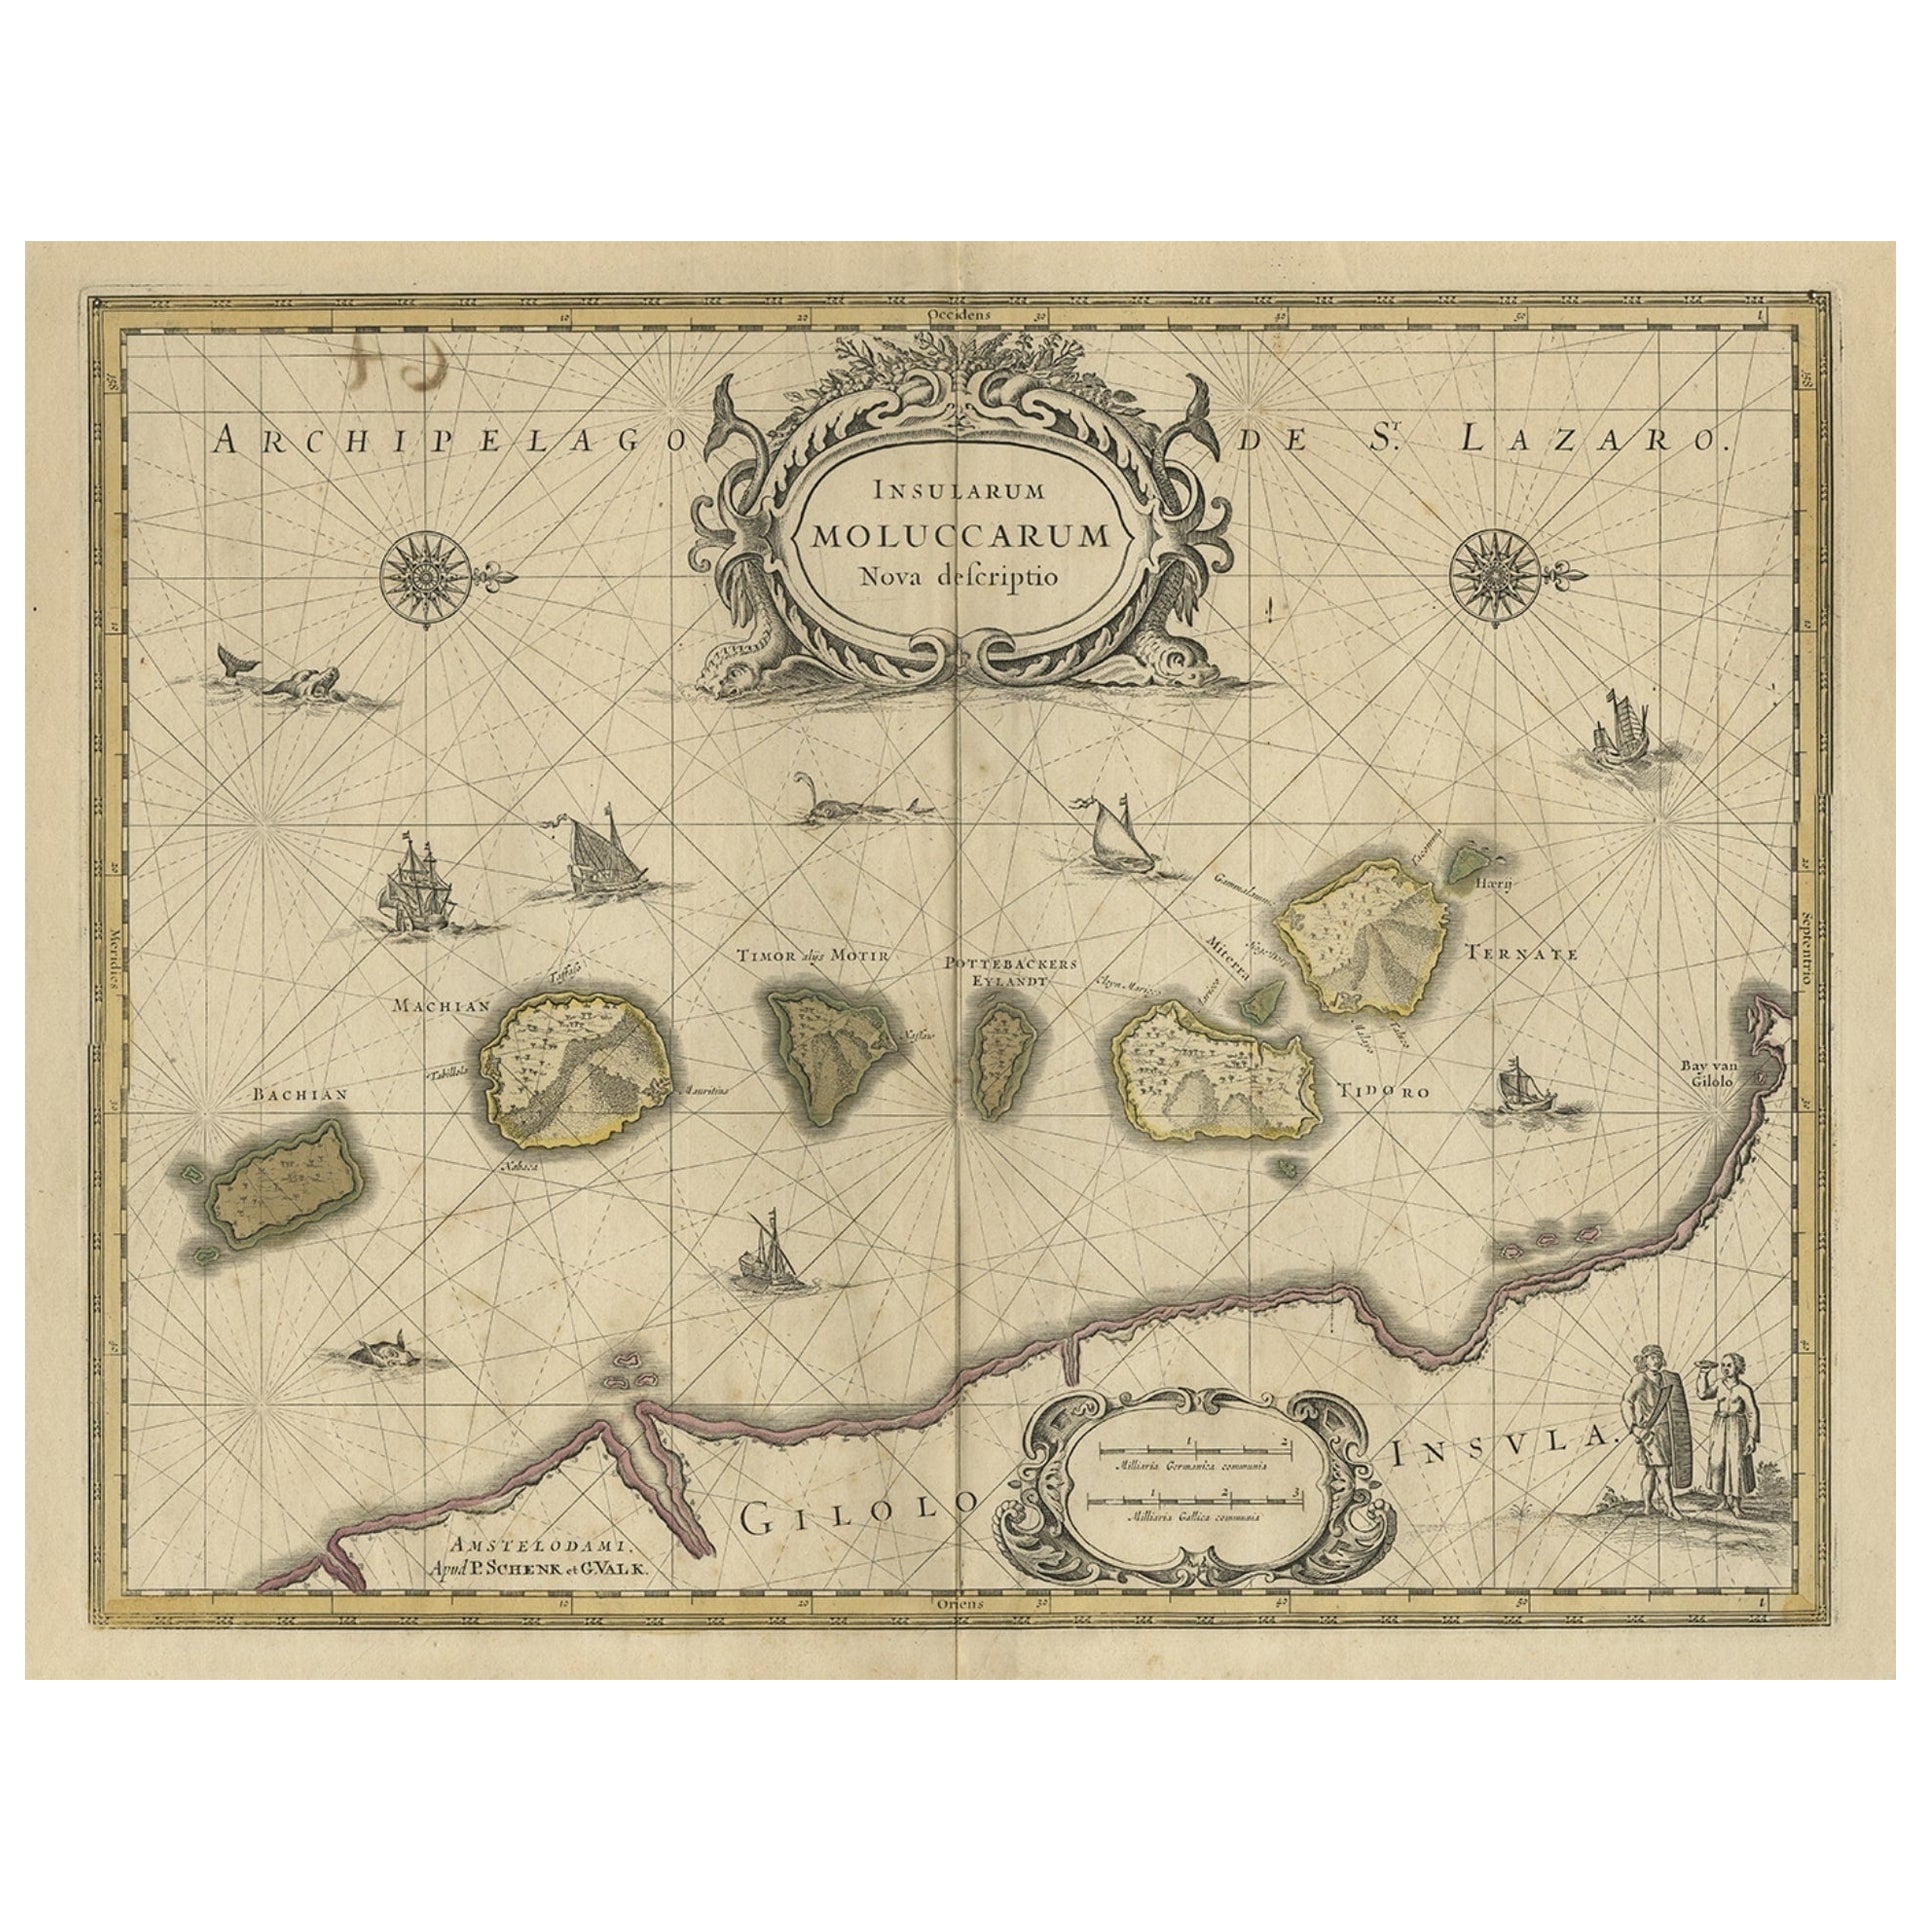 Old Map of the Moluccas, Known as the Famous Spice Islands, Indonesia, ca.1730 For Sale